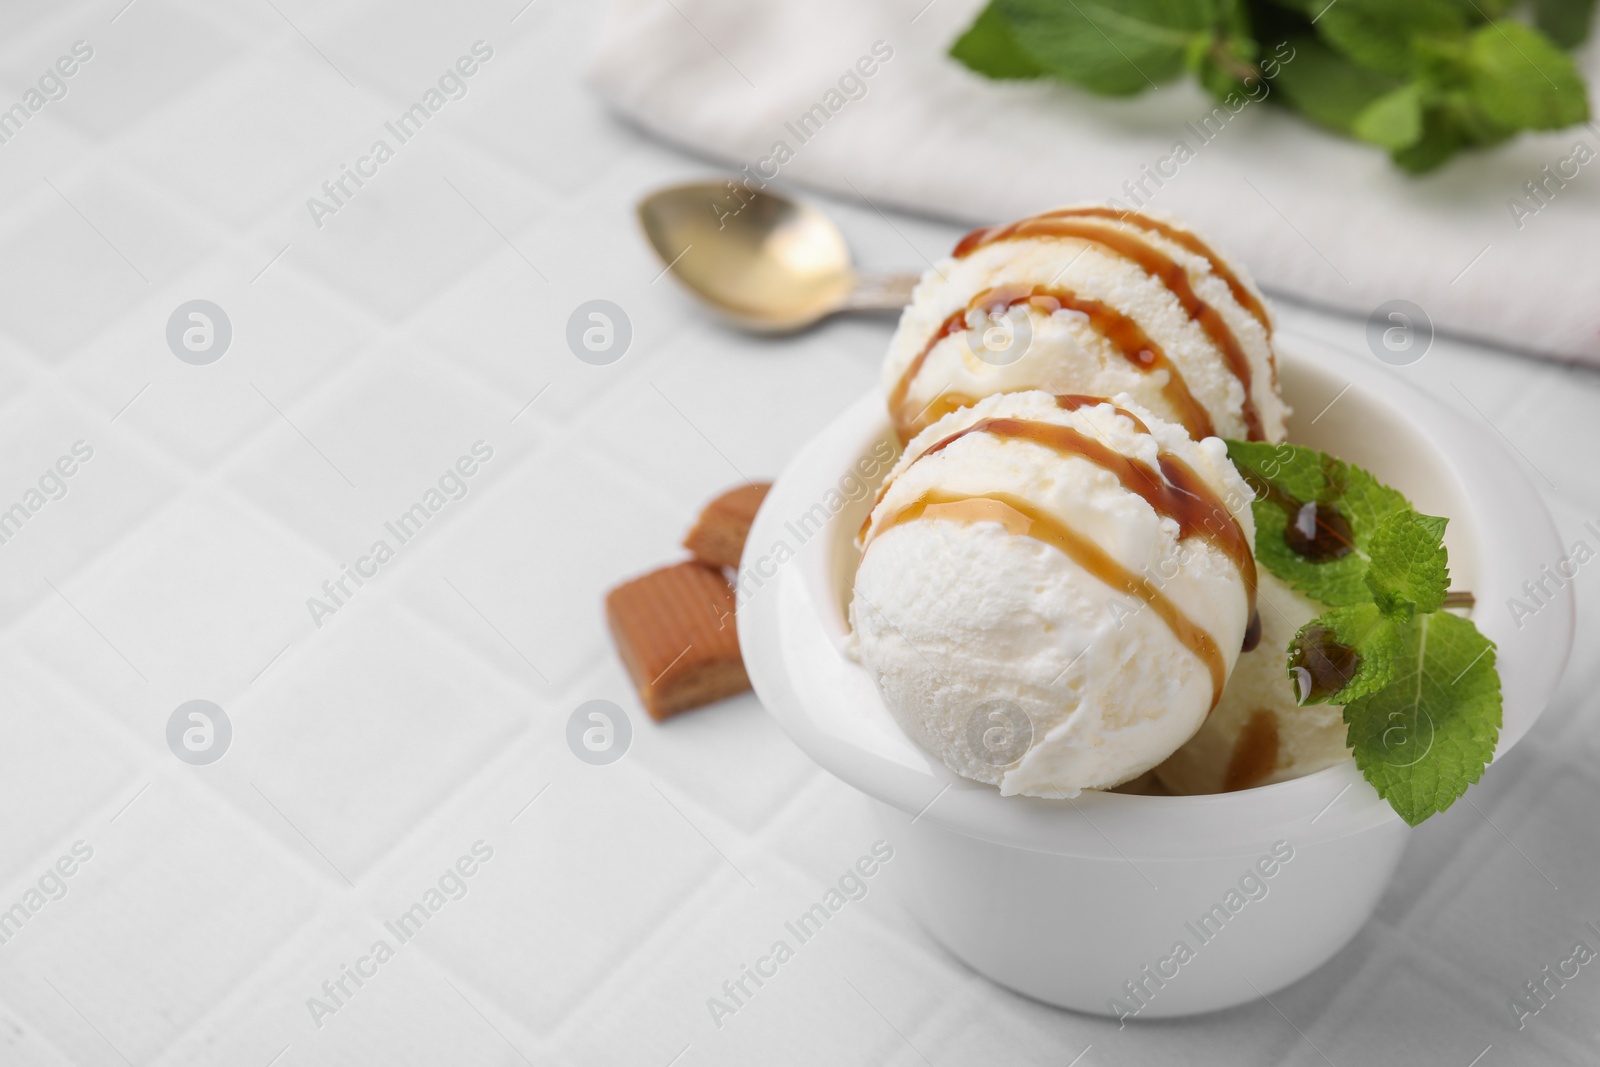 Photo of Scoops of tasty ice cream with mint and caramel sauce on white tiled table, space for text